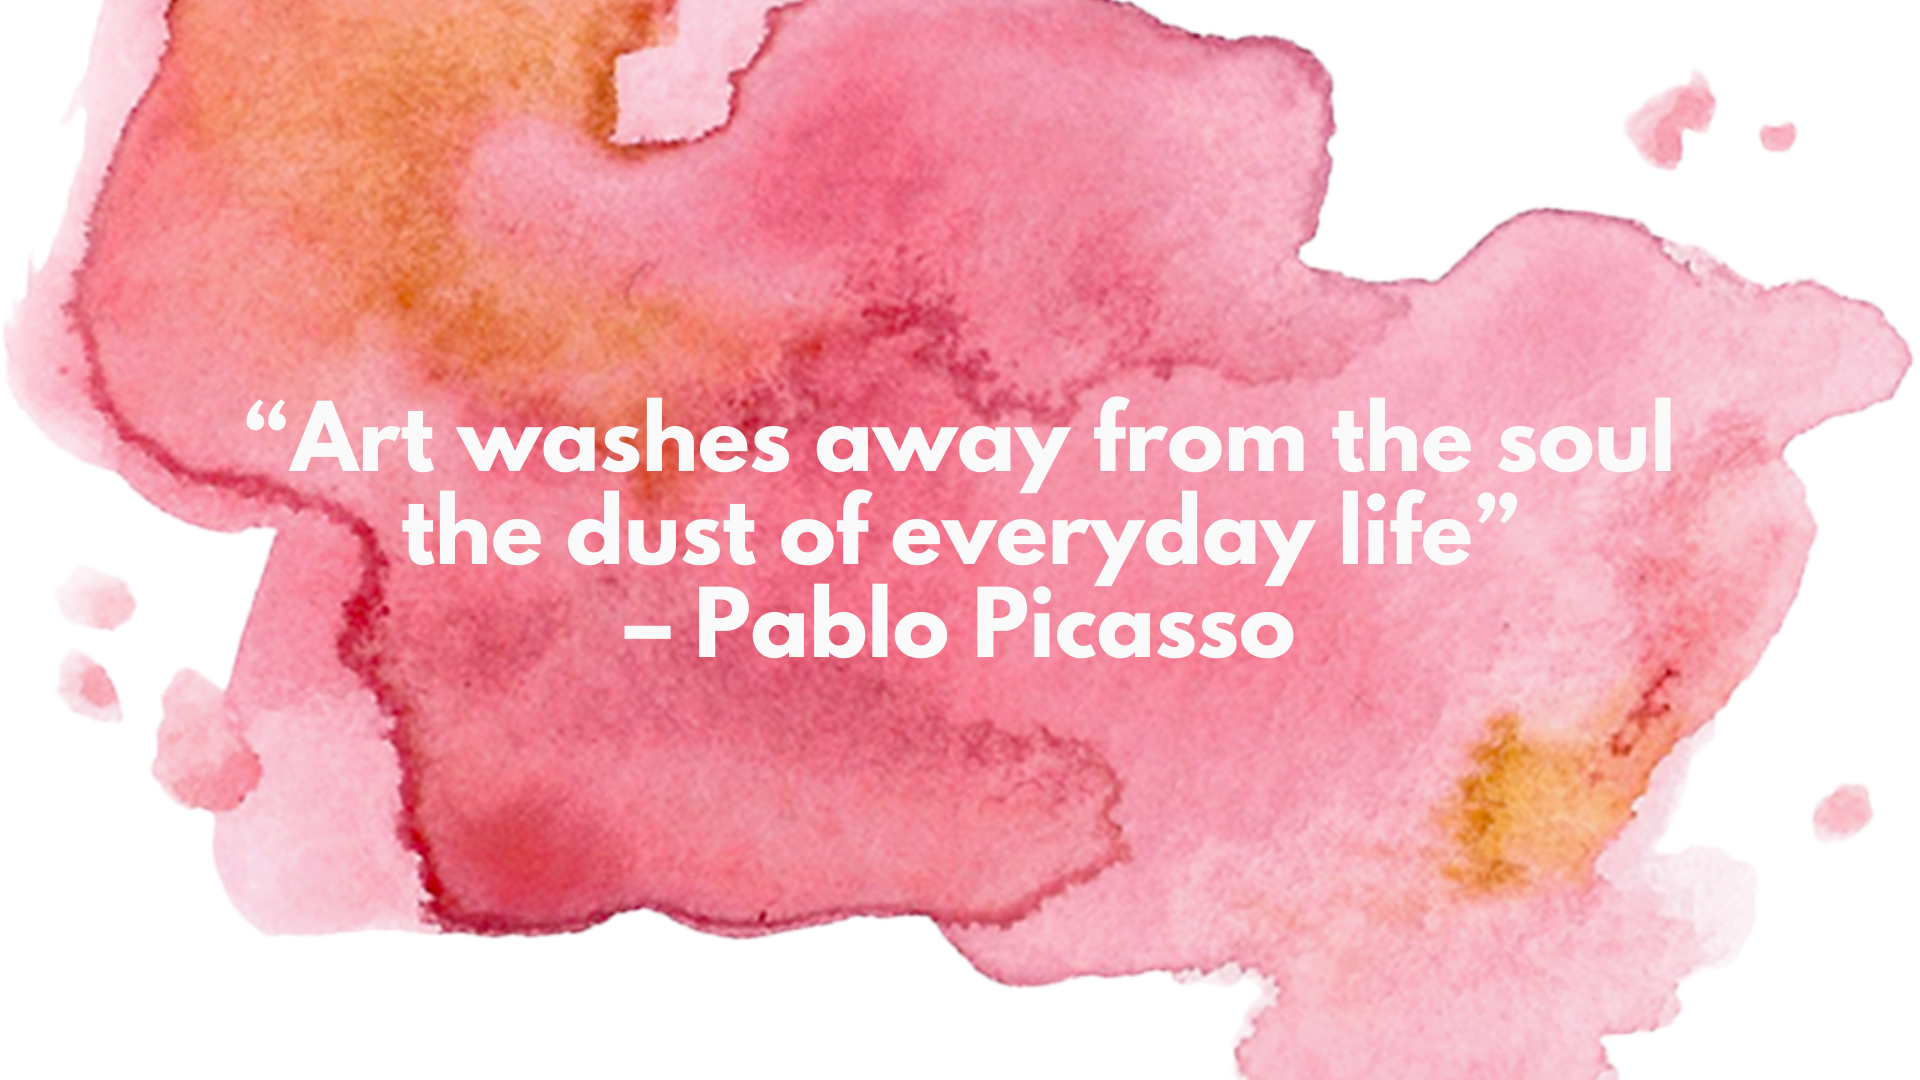 Art washes away from the soul the dust of everyday life - Pablo Picasso